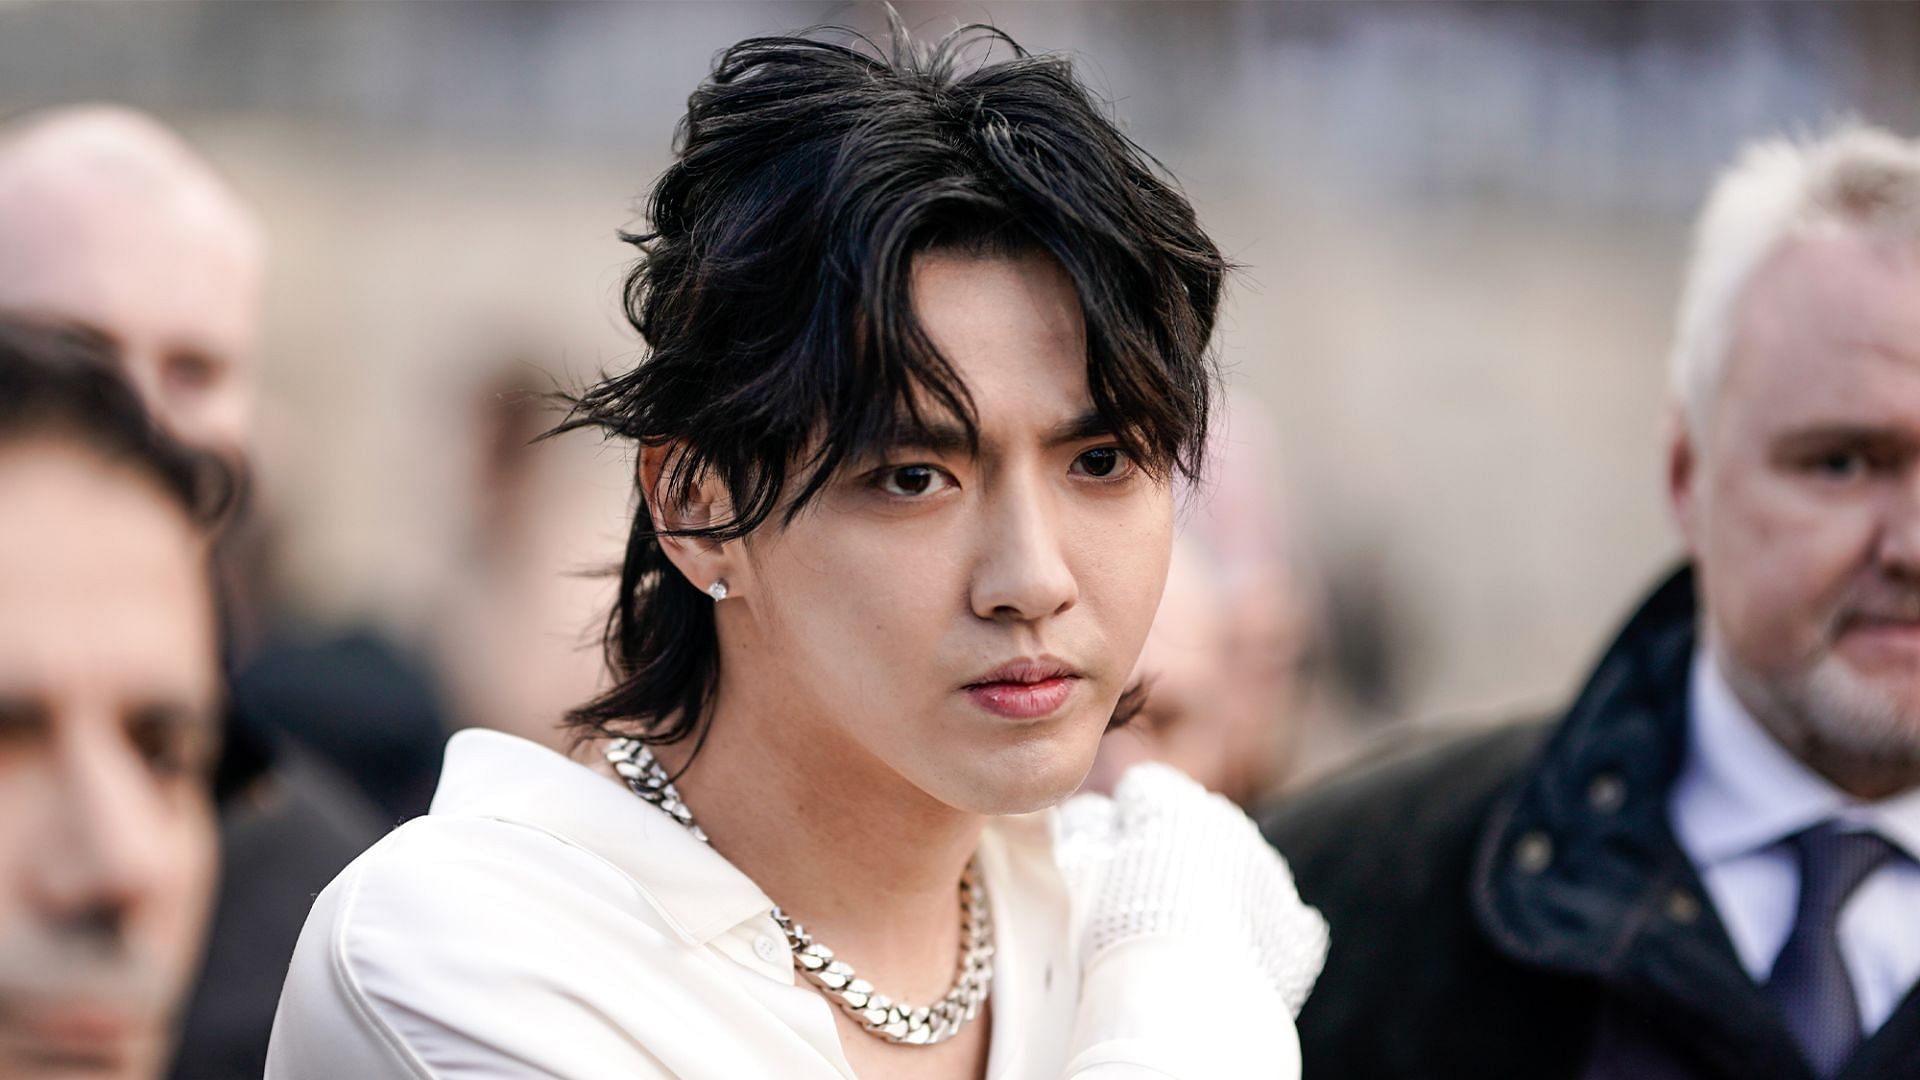 Detained Kris Wu caught by Customs for carrying counterfeit designer bags  in 2016, video clips of him hugging women in clubs leaked - Dimsum Daily